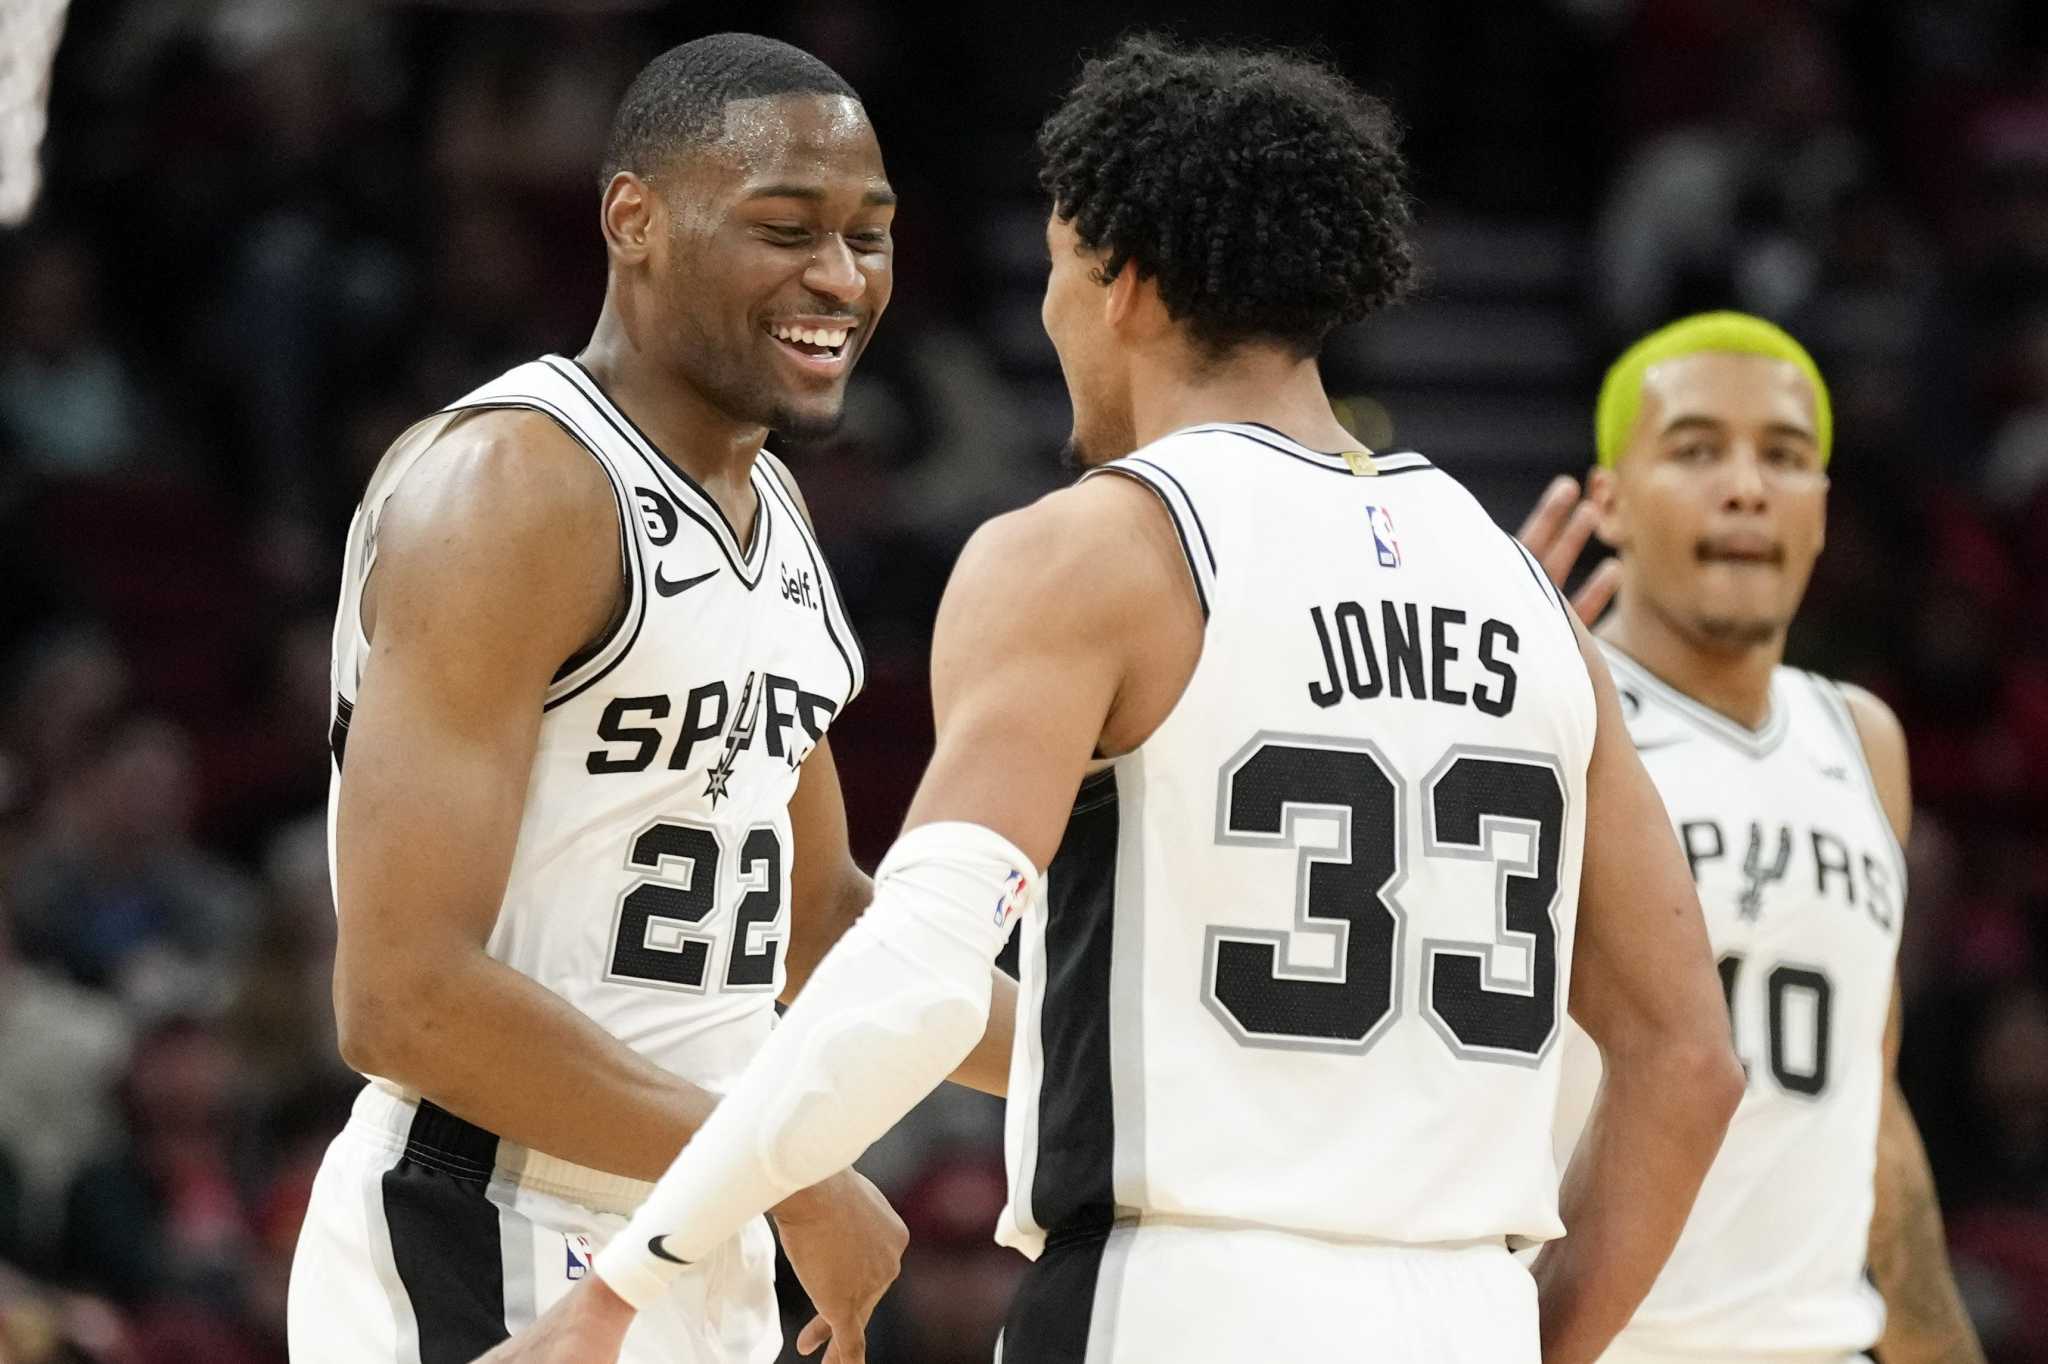 Hoop Central on X: Love this new San Antonio Spurs City Edition